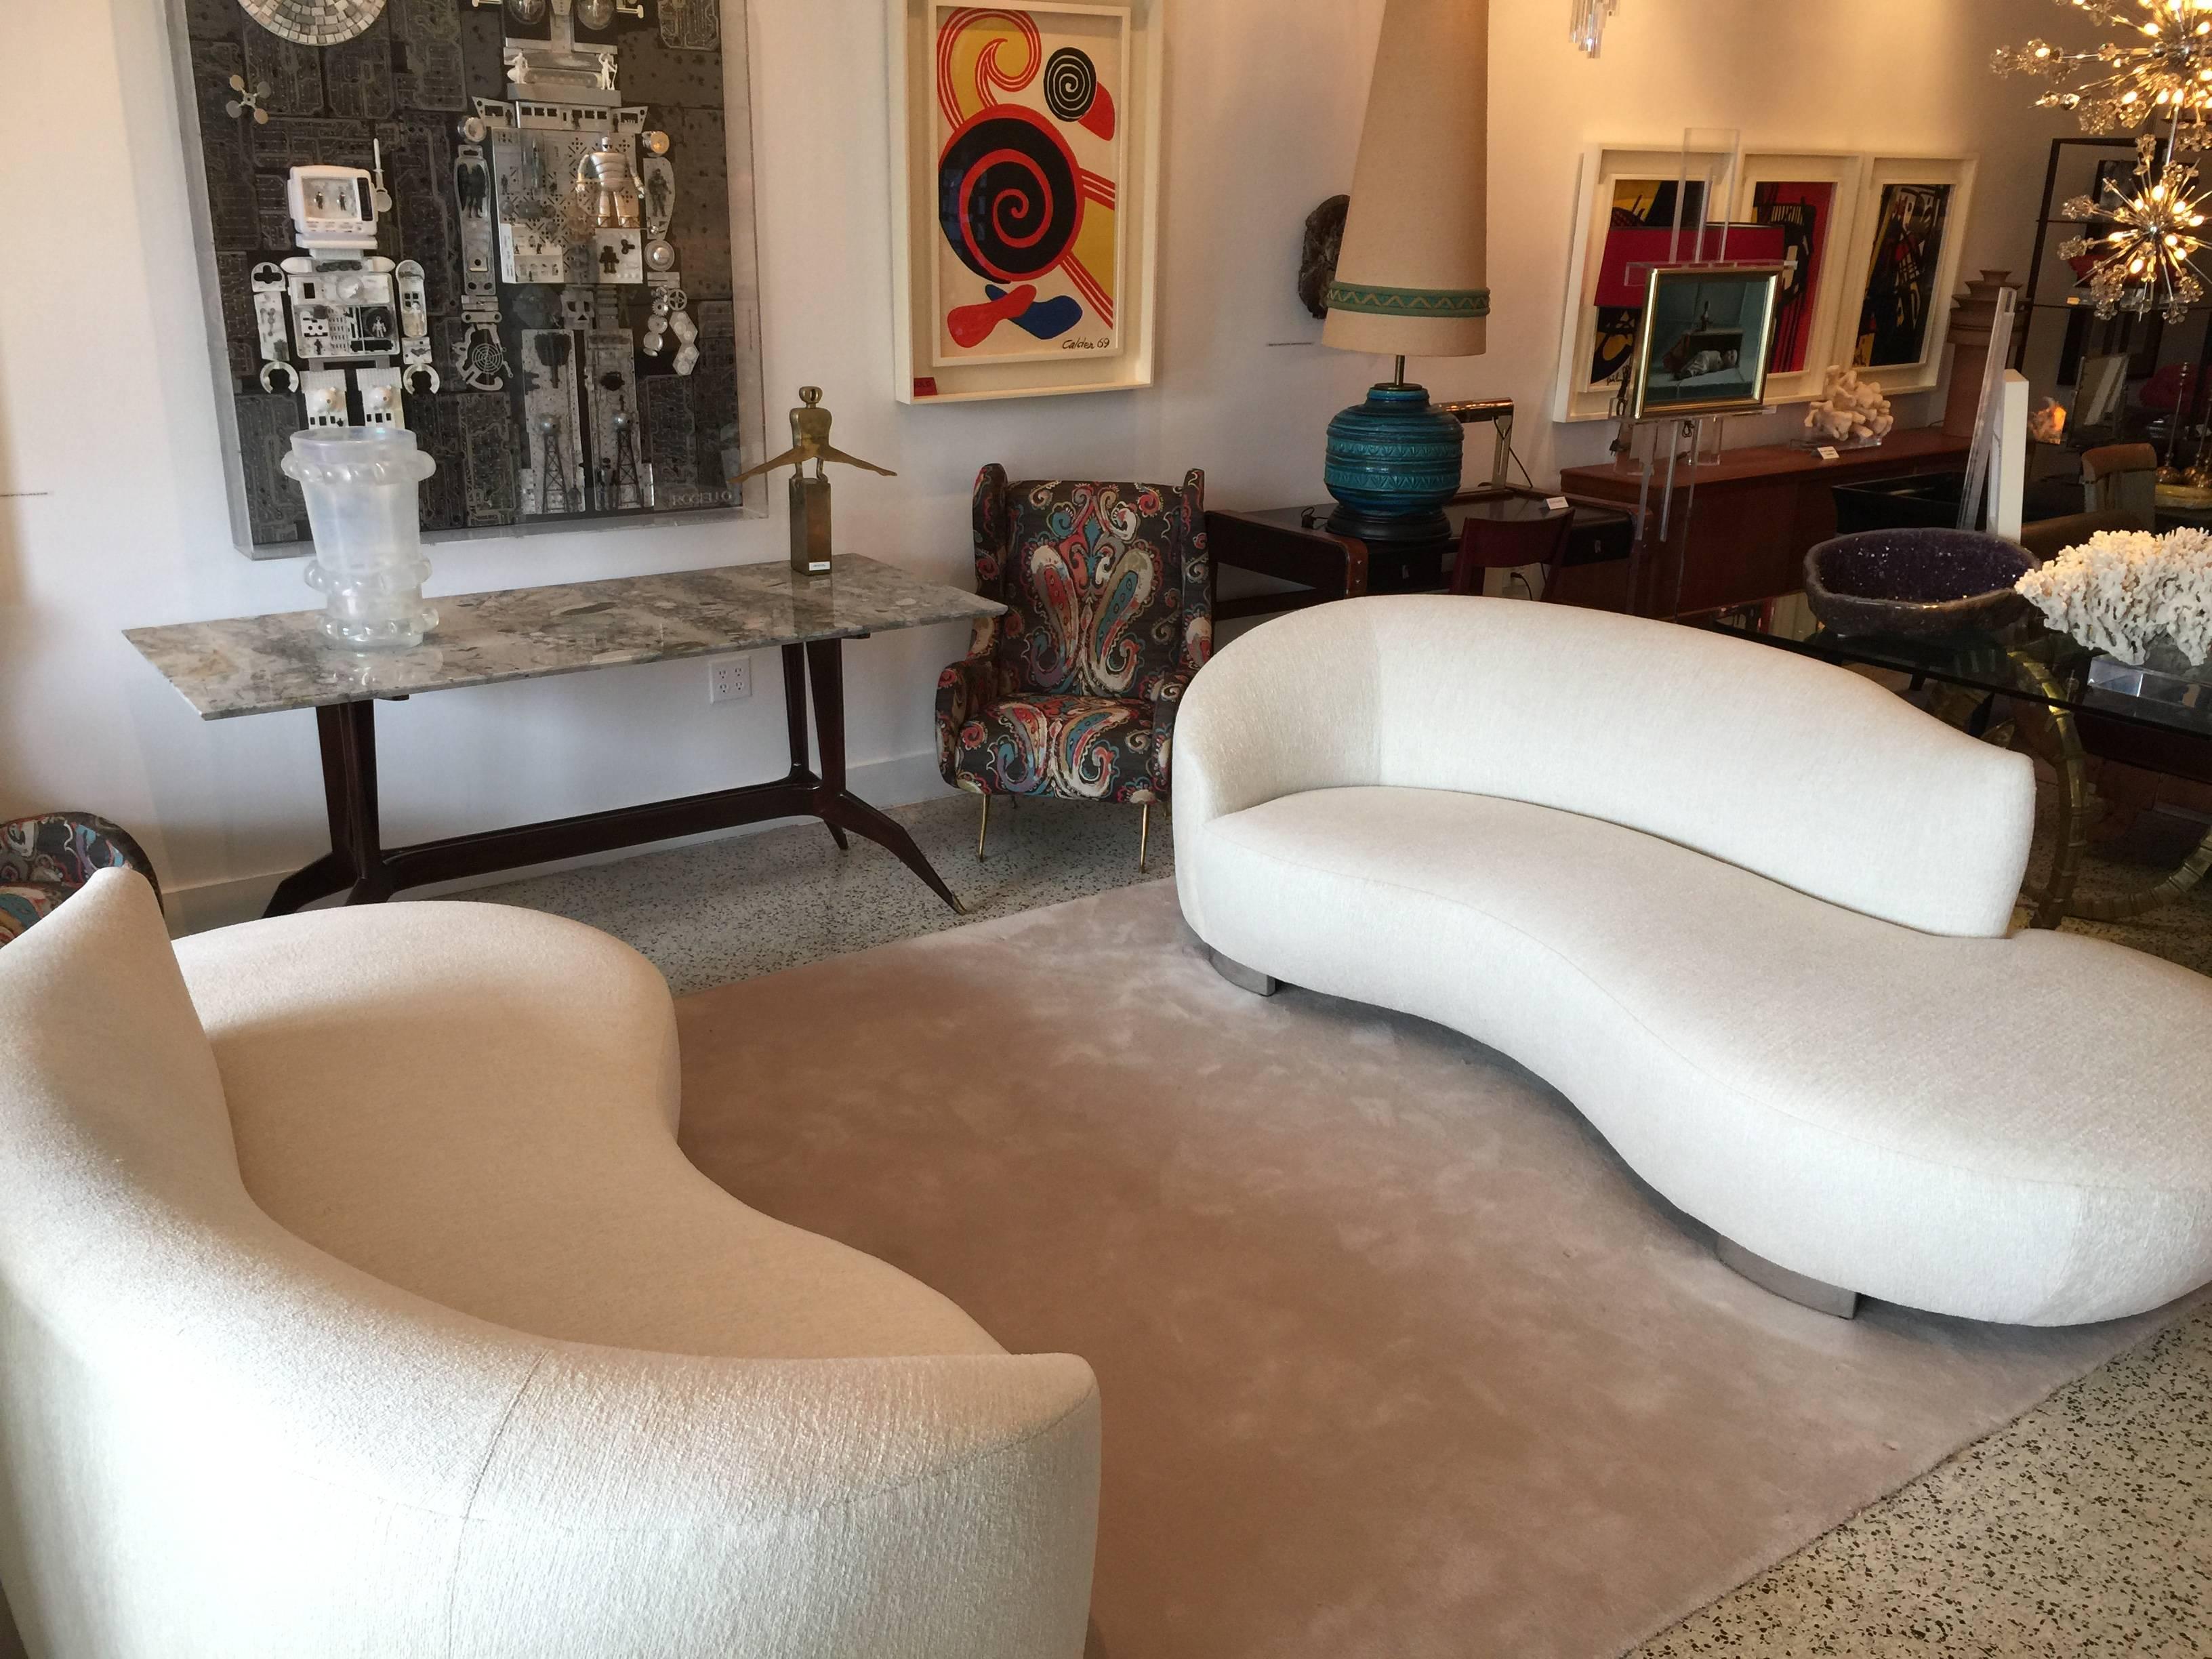 Perfectly matched pair of newly upholstered cloud sofas designed by American icon Vladimir Kagan for Preview furniture in the 1980s with chrome base feet.

These are two VINTAGE SOFAS that have been fully restored in this luxurious low-pile shag